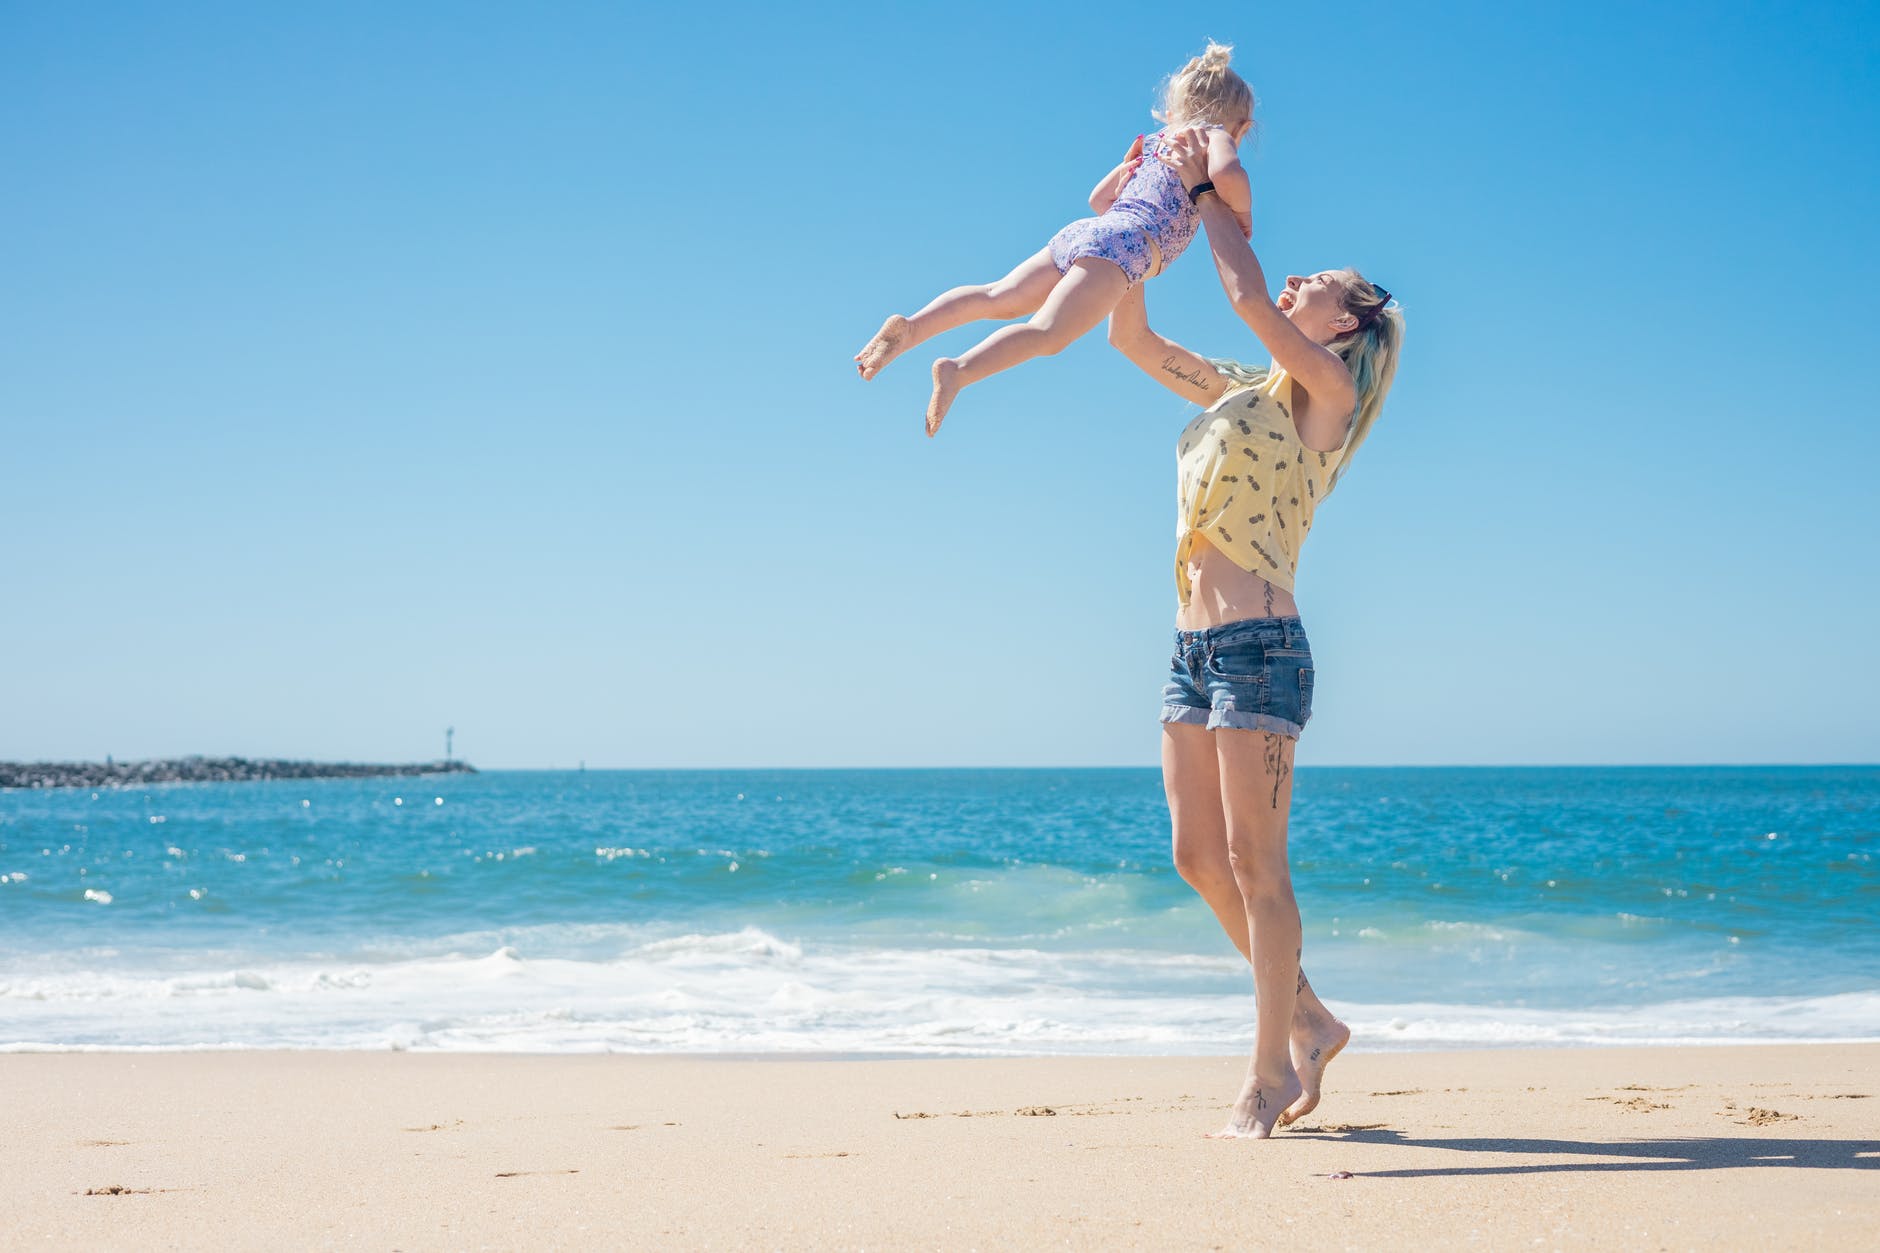 a woman throwing her daughter in the air while standing on the beach sand